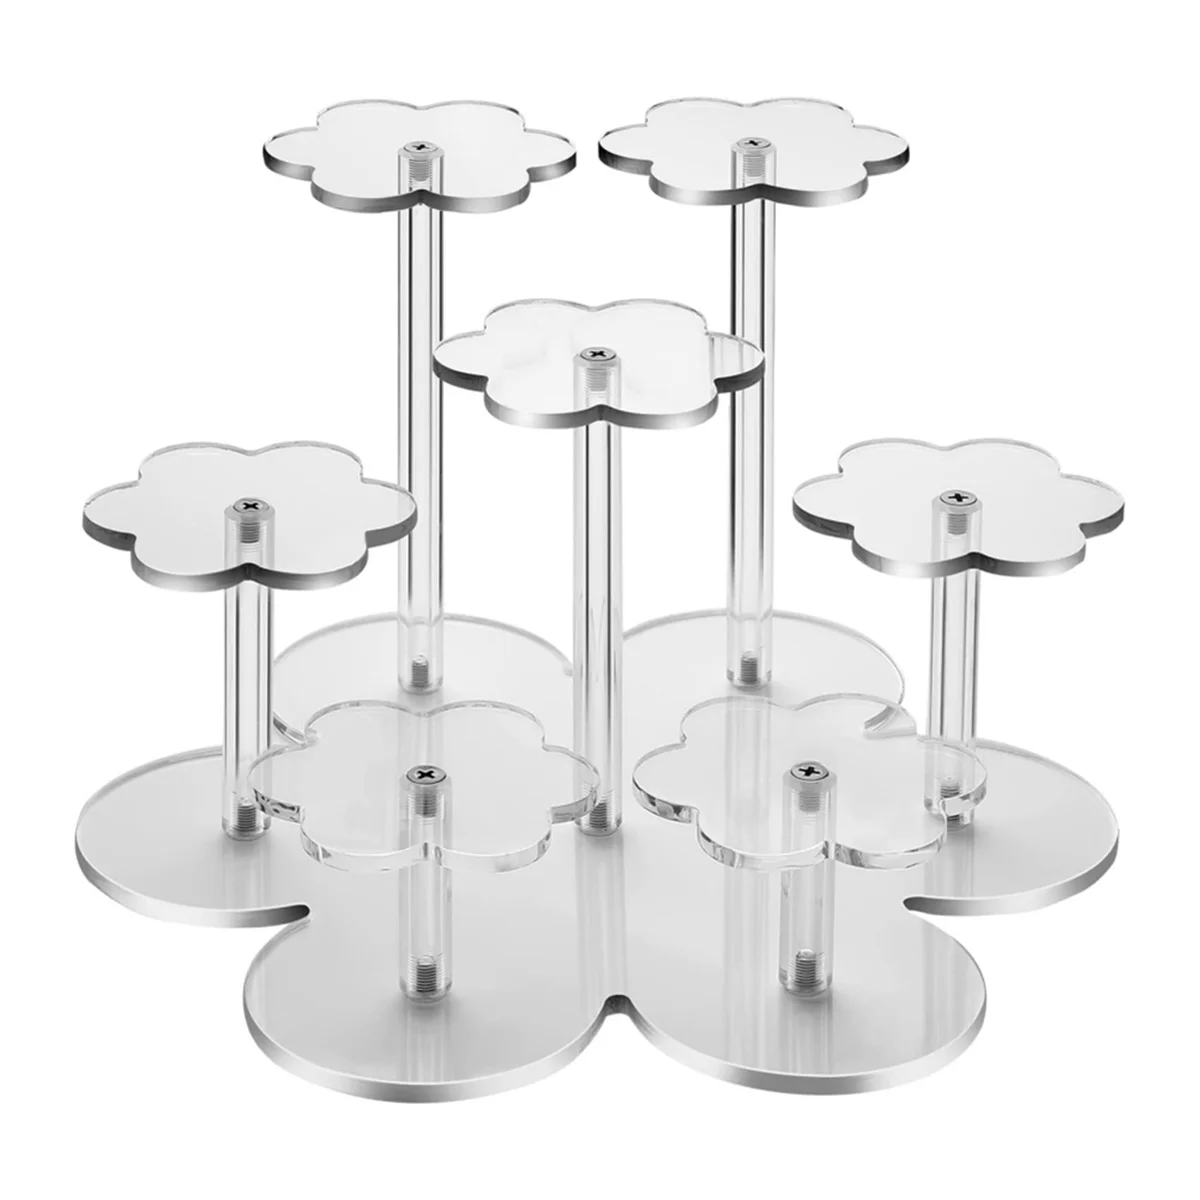 

Acrylic Display Stand for Figures,7-Tier Display Risers for Collectibles,Acrylic Cupcakes Stand for Pastry Candy Display